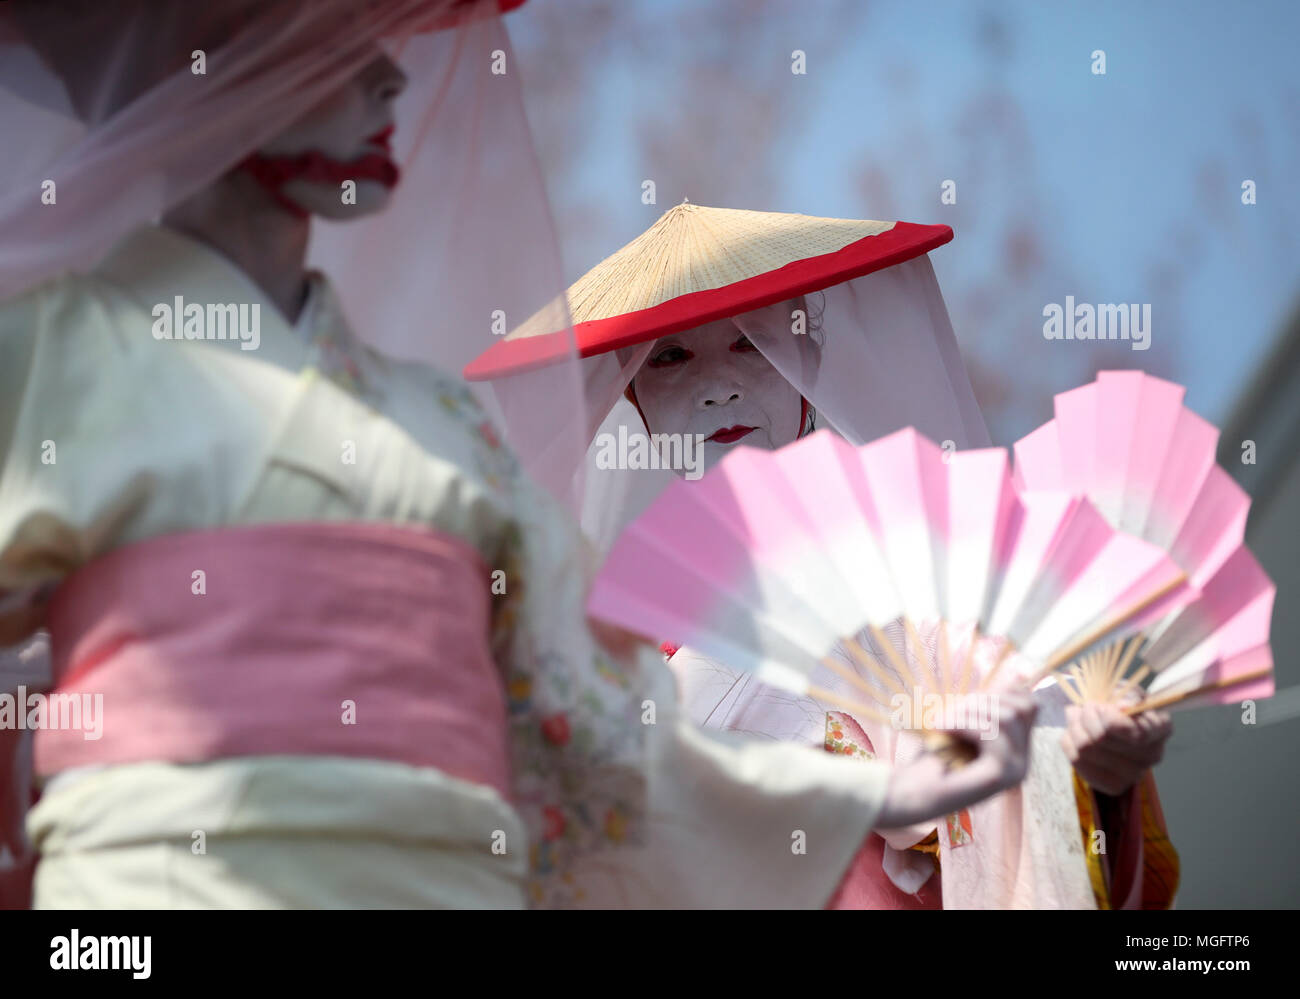 New York, USA. 28th Apr, 2018. Dancers perform in Brooklyn Botanic Garden in New York, the United States, on April 28, 2018. The annual cherry blossom festival is held here on Saturday and Sunday, attracting thousands of people to enjoy cherry blossoms during the weekend. Credit: Wang Ying/Xinhua/Alamy Live News Stock Photo